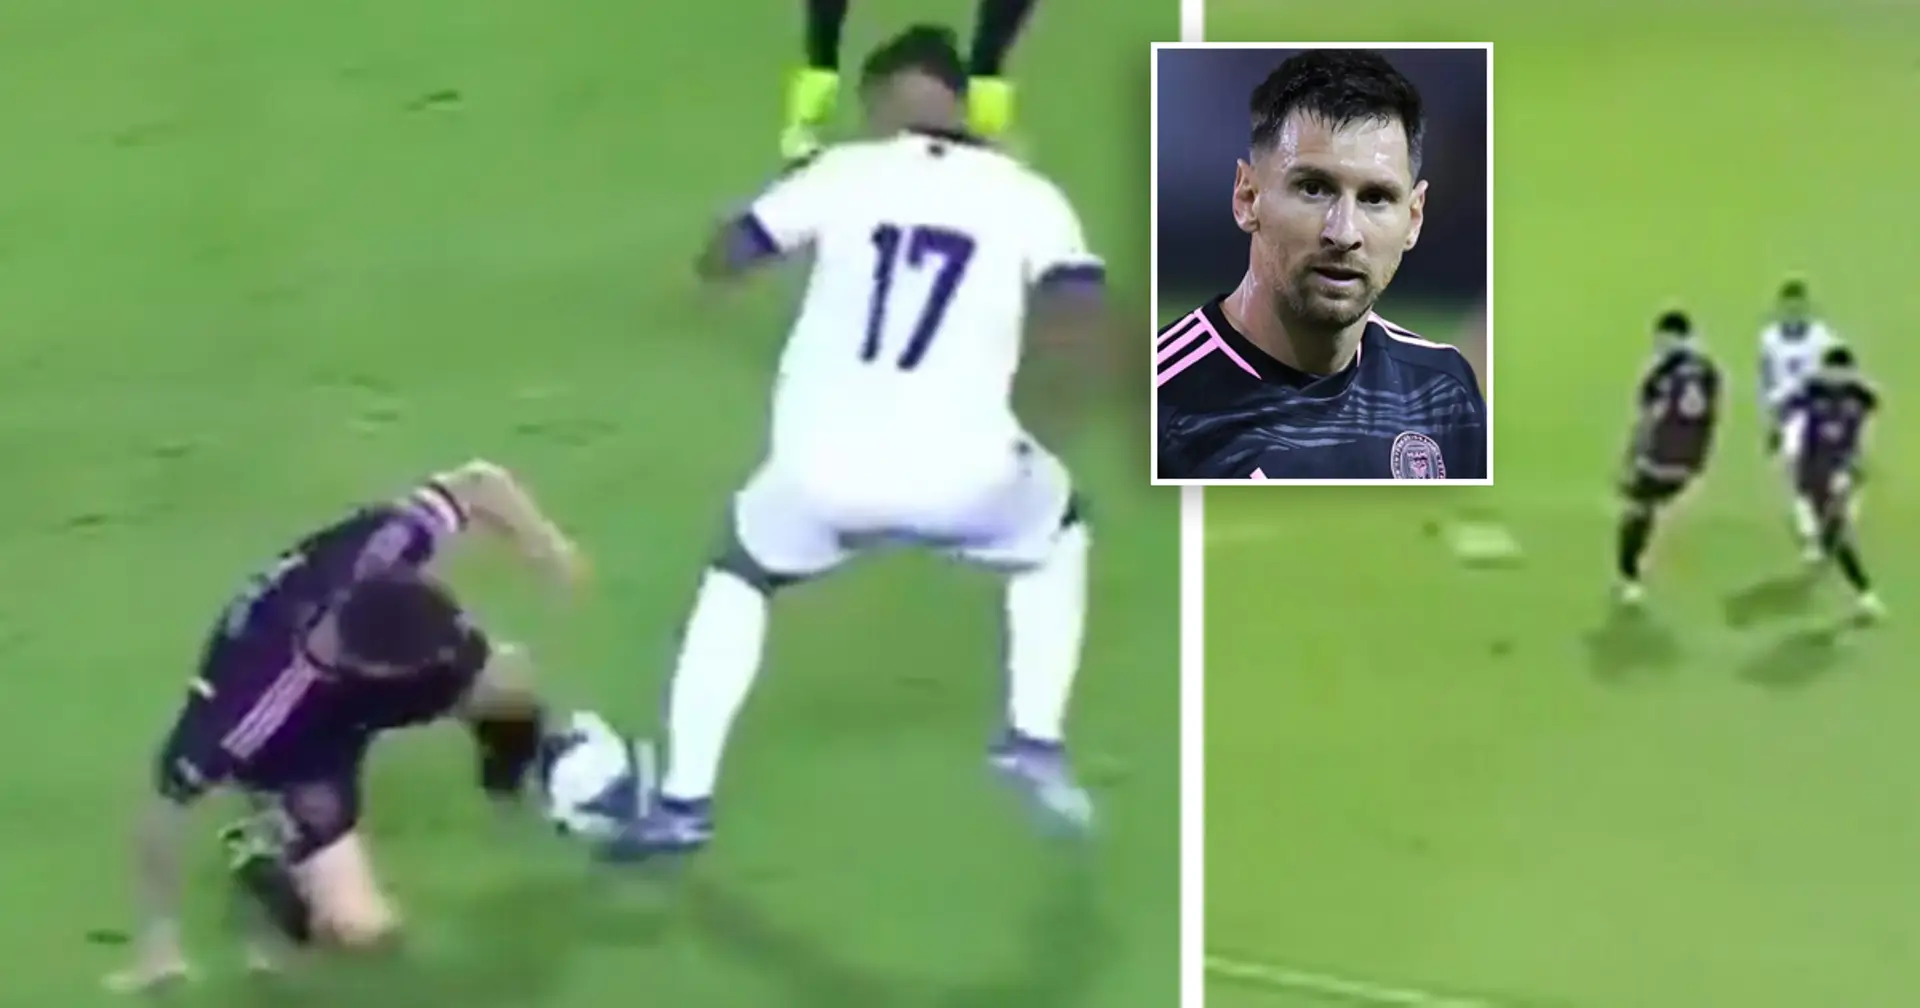 Two mindblowing episodes prove Messi is back in beast mode after vacation